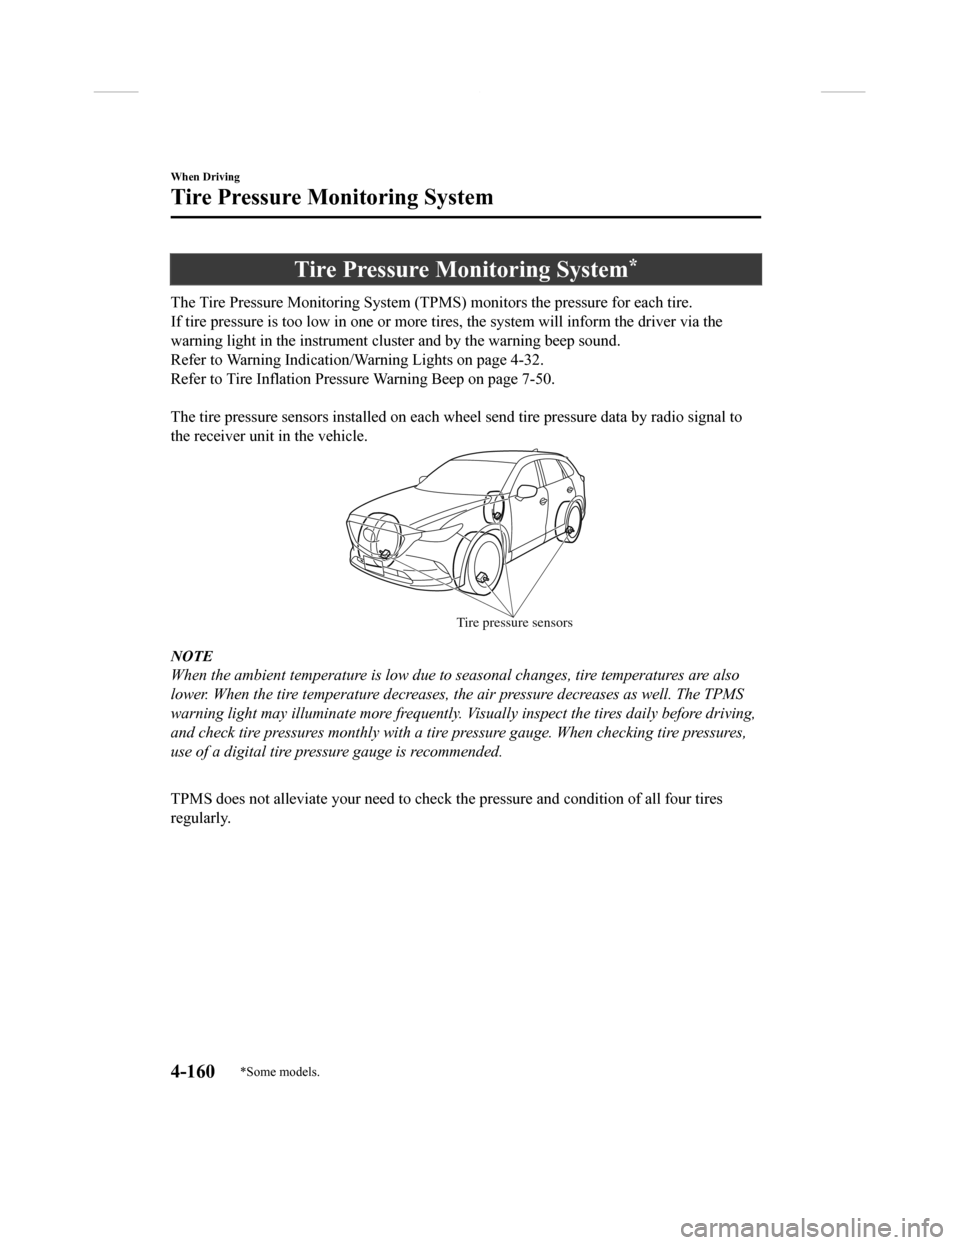 MAZDA MODEL CX-9 2018  Owners Manual (in English) Tire Pressure Monitoring System*
The Tire Pressure Monitoring System (TPMS) monitors the pressure for each tire.
If tire pressure is to o low in one or more  tires, the system will inform the driver v